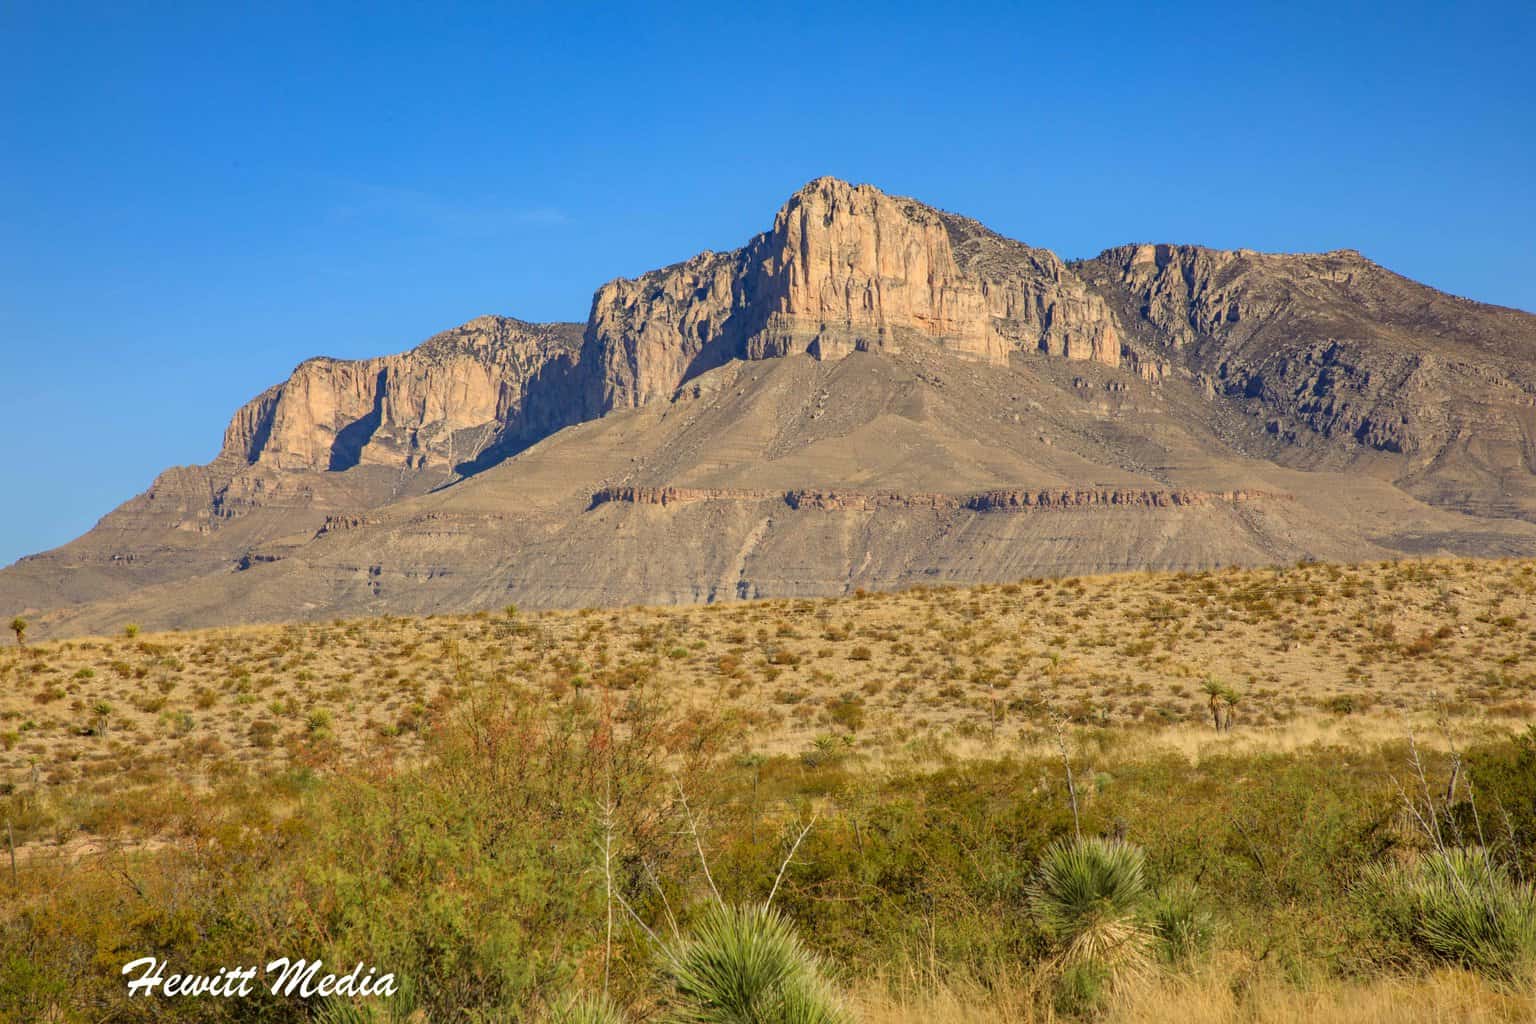 Carlsbad Caverns National Park Guide - Guadalupe Mountains National Park